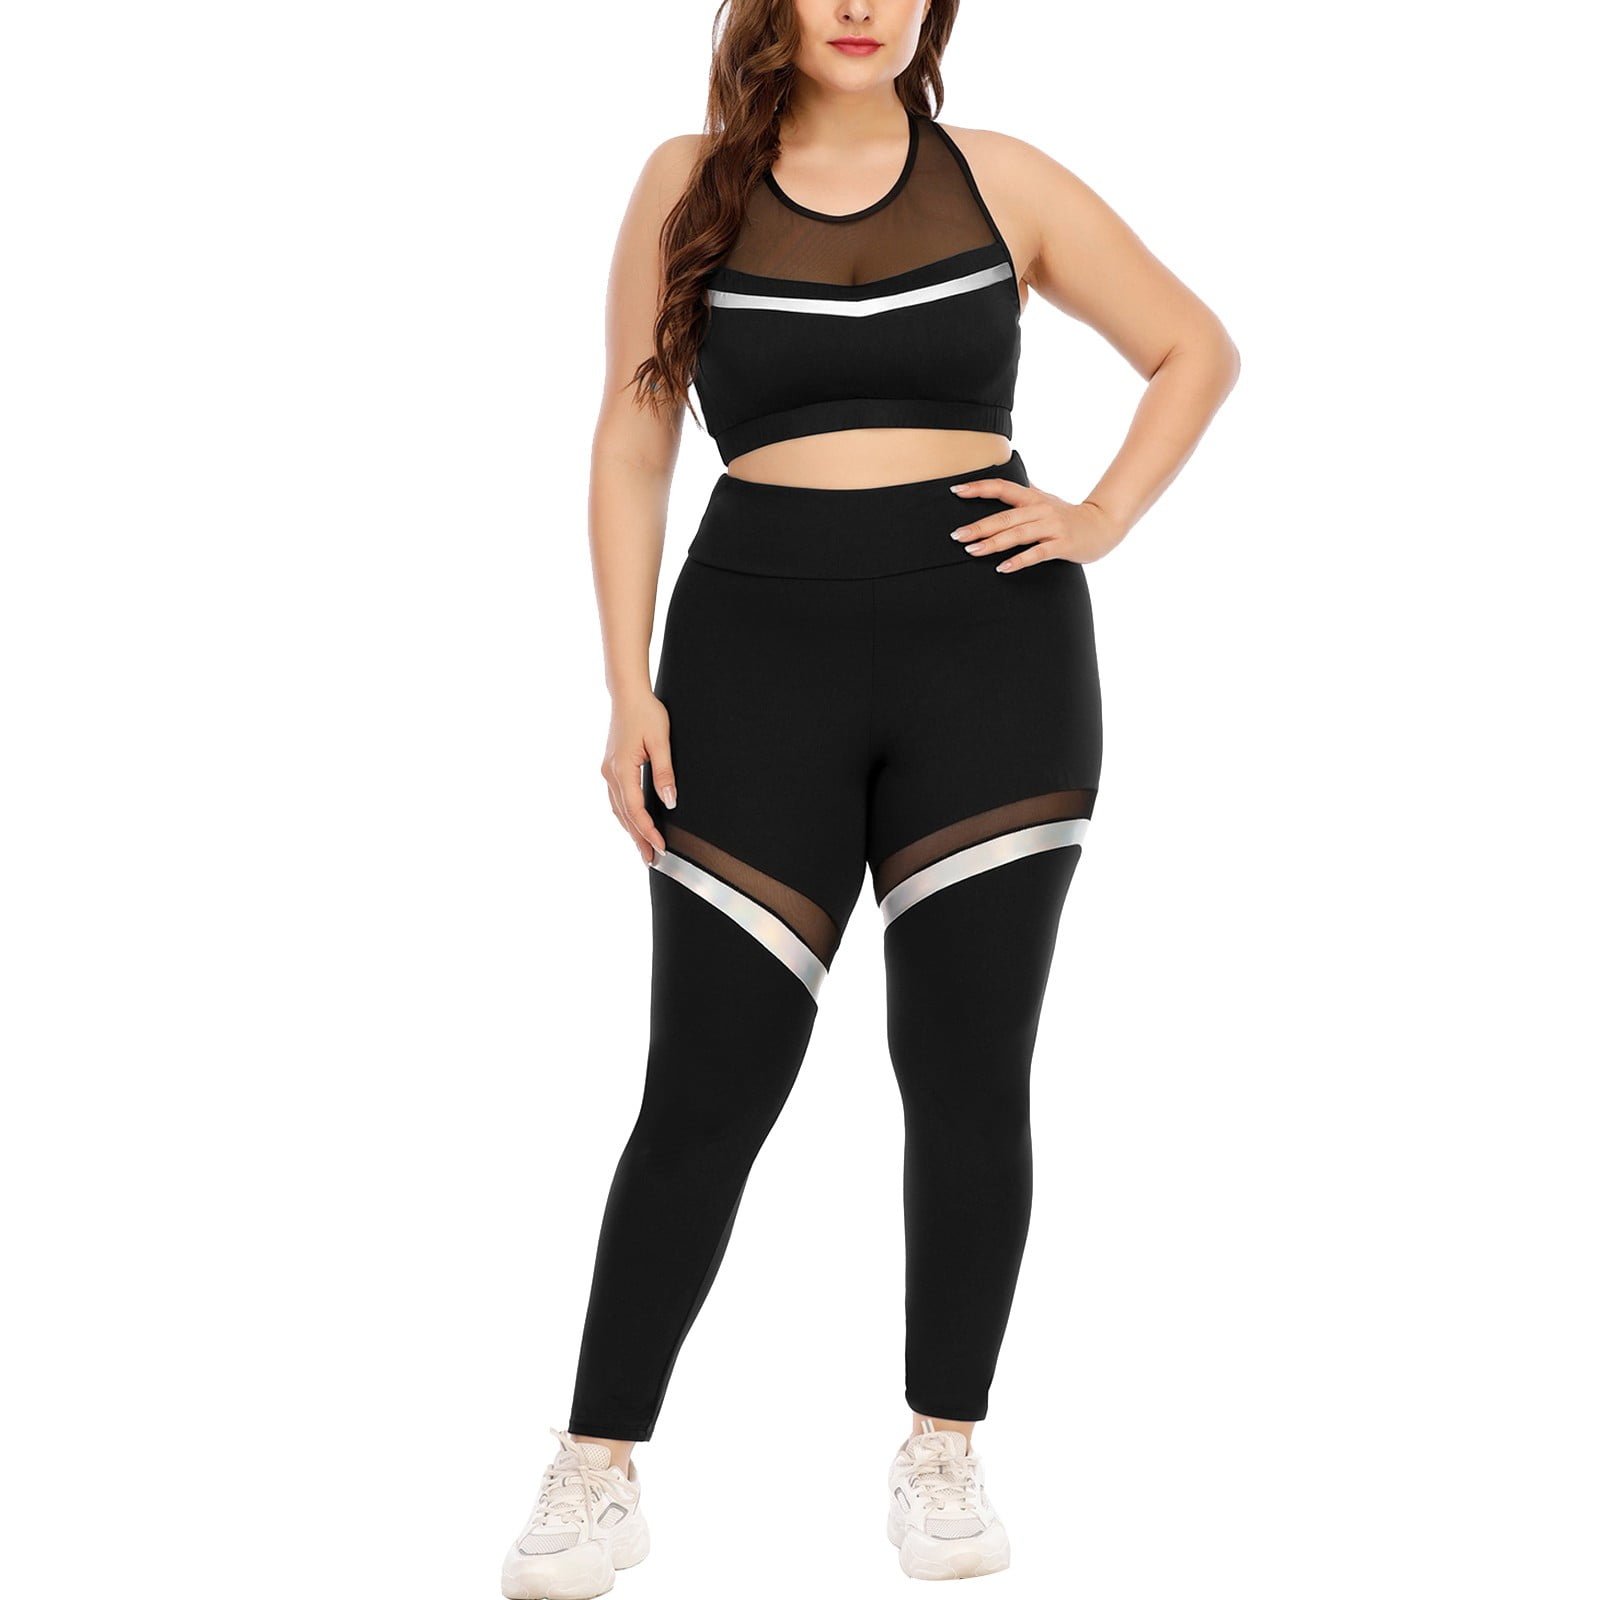 HSMQHJWE Yoga Outfit Women Workout Sets 2 Pieces Suits High Waisted Yoga  Leggings With Stretch Sports Bra Tracksuits Active Set Yoga Top And Pants  Set 